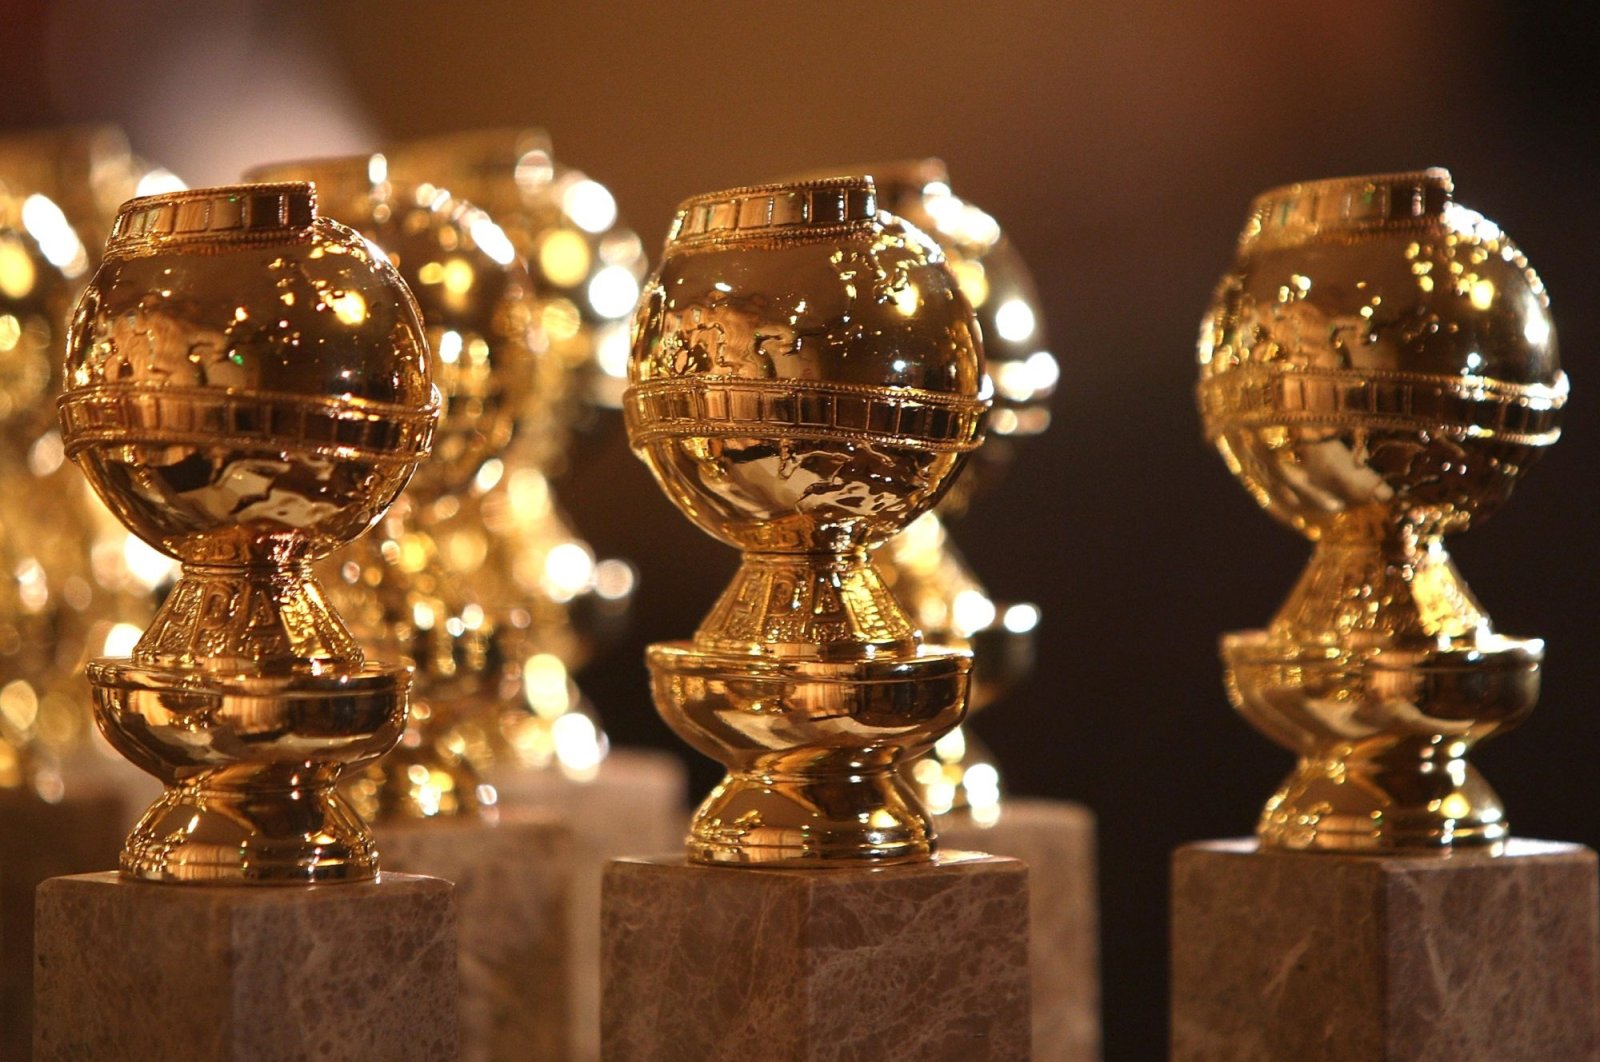 The new 2009 Golden Globe statuettes are on display during an unveiling by the Hollywood Foreign Press Association at the Beverly Hilton Hotel, California, U.S., Jan. 6, 2009. (Getty Images)